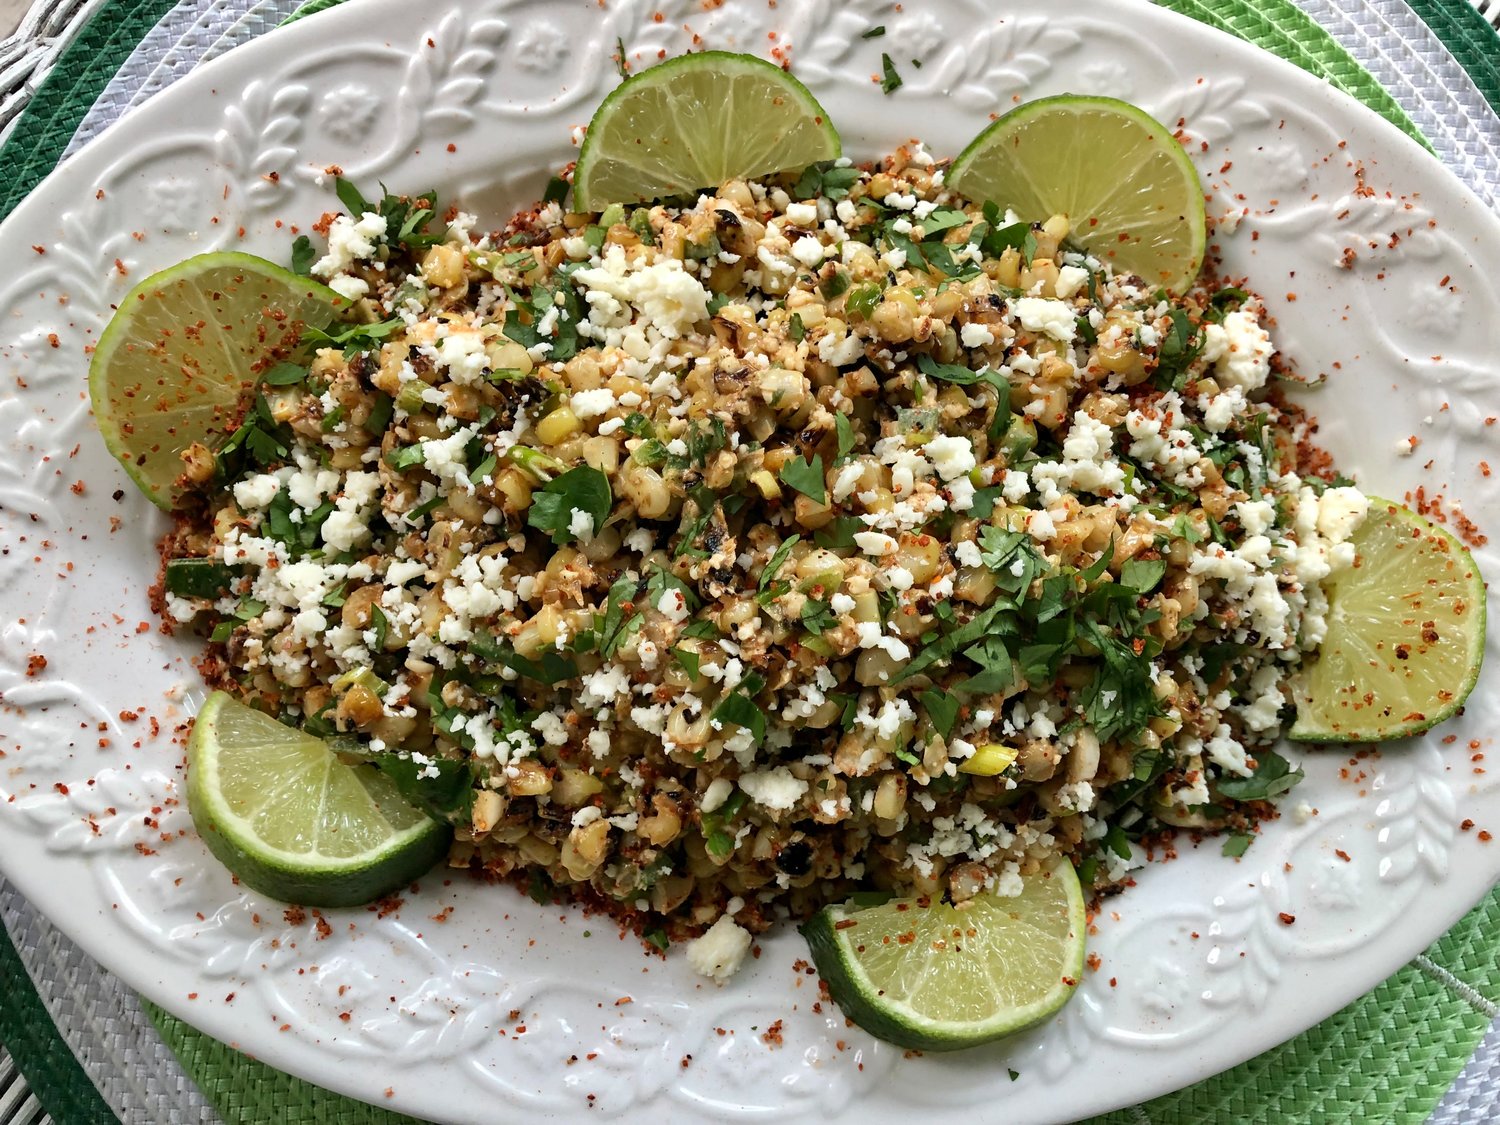 The kernels in this Mexican Corn Salad with cilantro and lime are blistered in a hot wok, rather than over a charcoal grill.